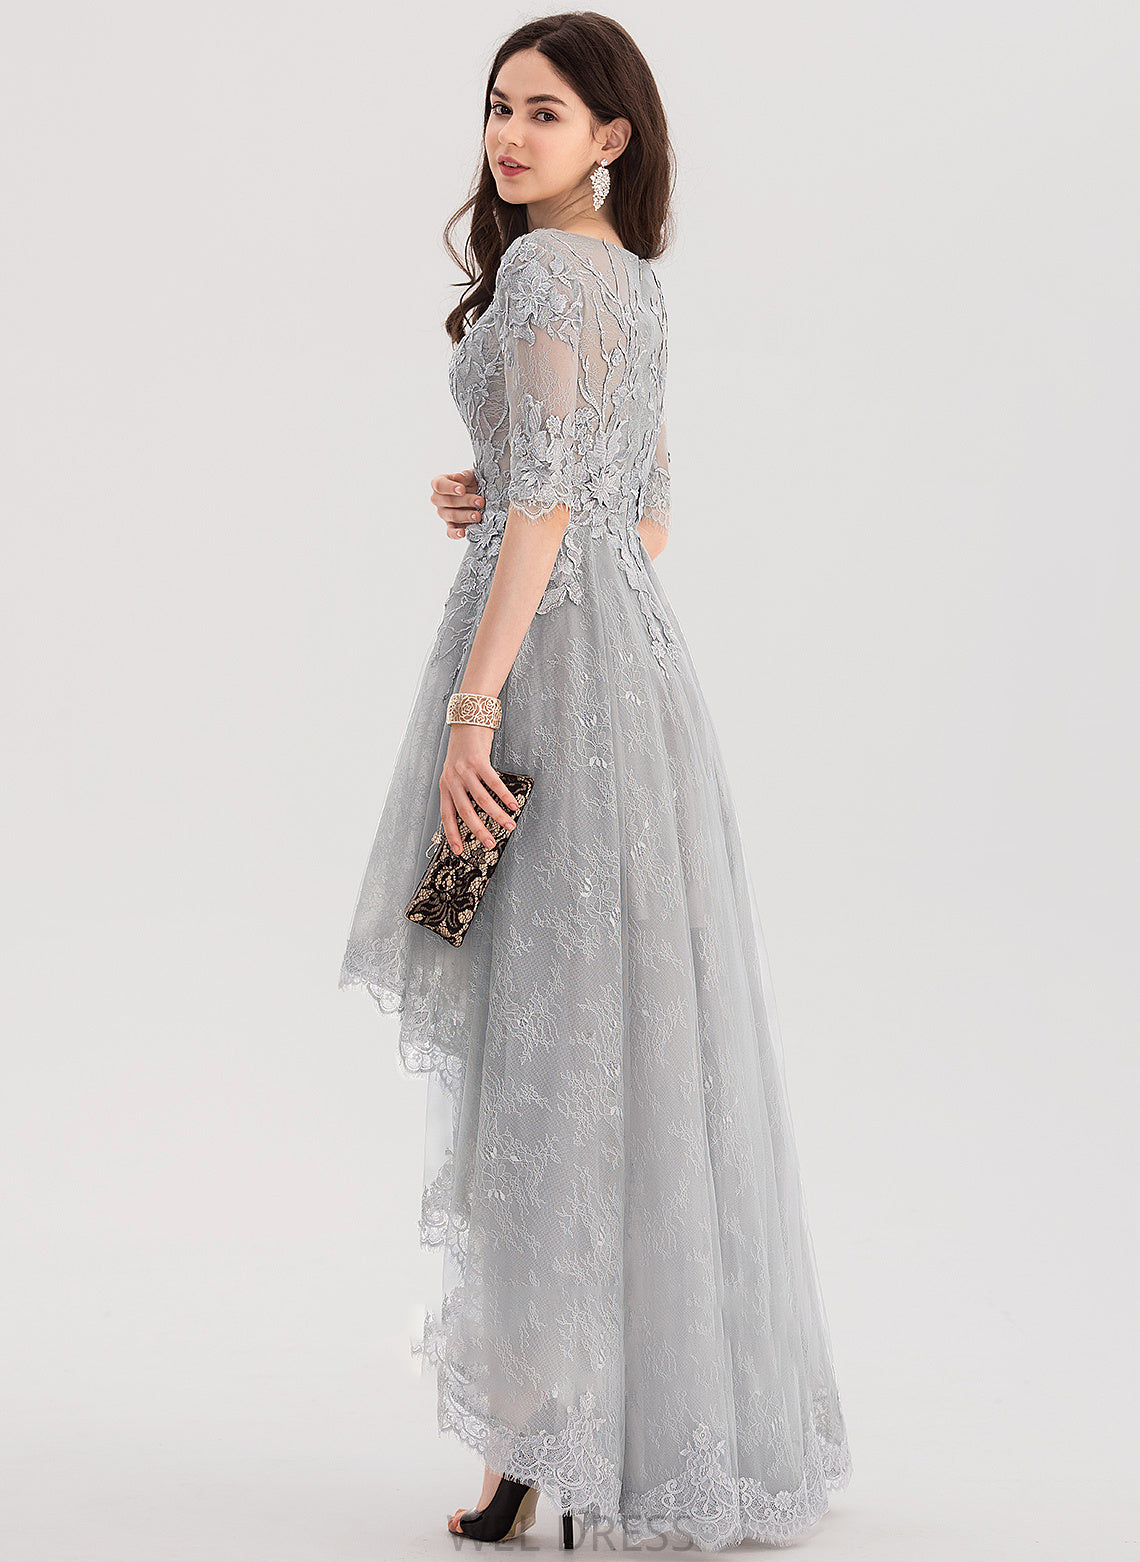 Scoop Ball-Gown/Princess Matilda Neck Asymmetrical Tulle Lace Prom Dresses